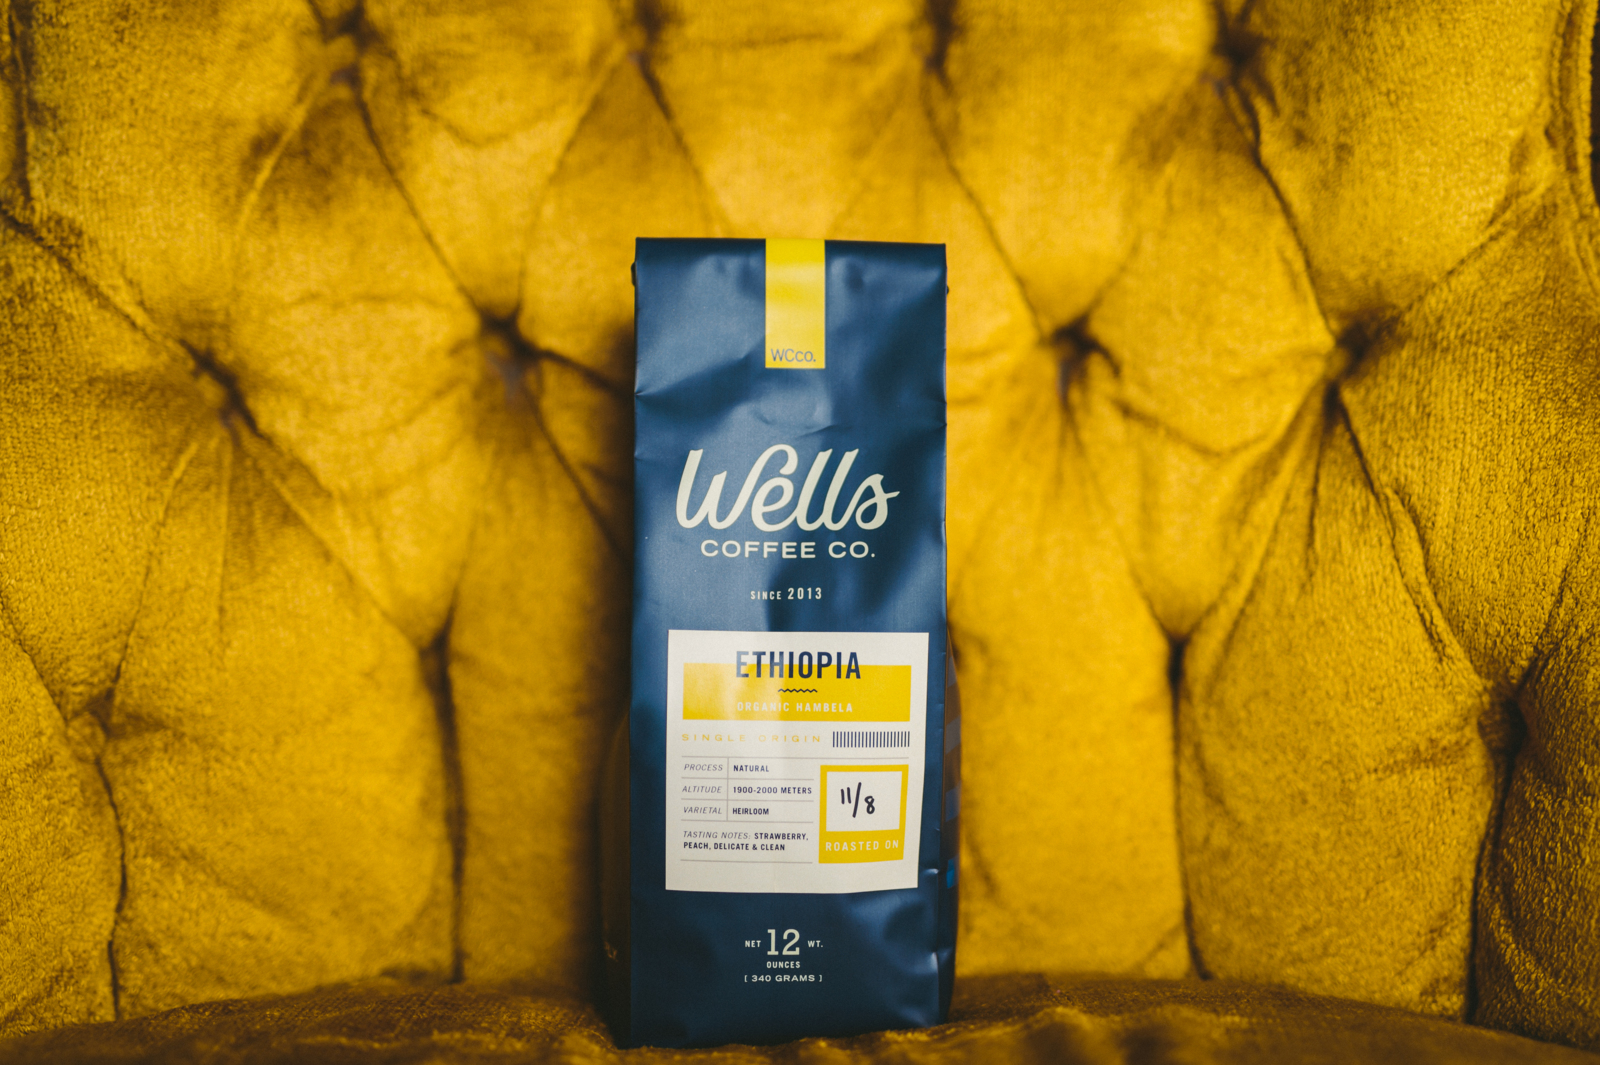 IU C&I Studios Page and Post How to Update Your Logo Design without Losing Brand Recognition Bag of Ethiopia version of coffee from Wells Coffee Co on display on mustard colored plush chair